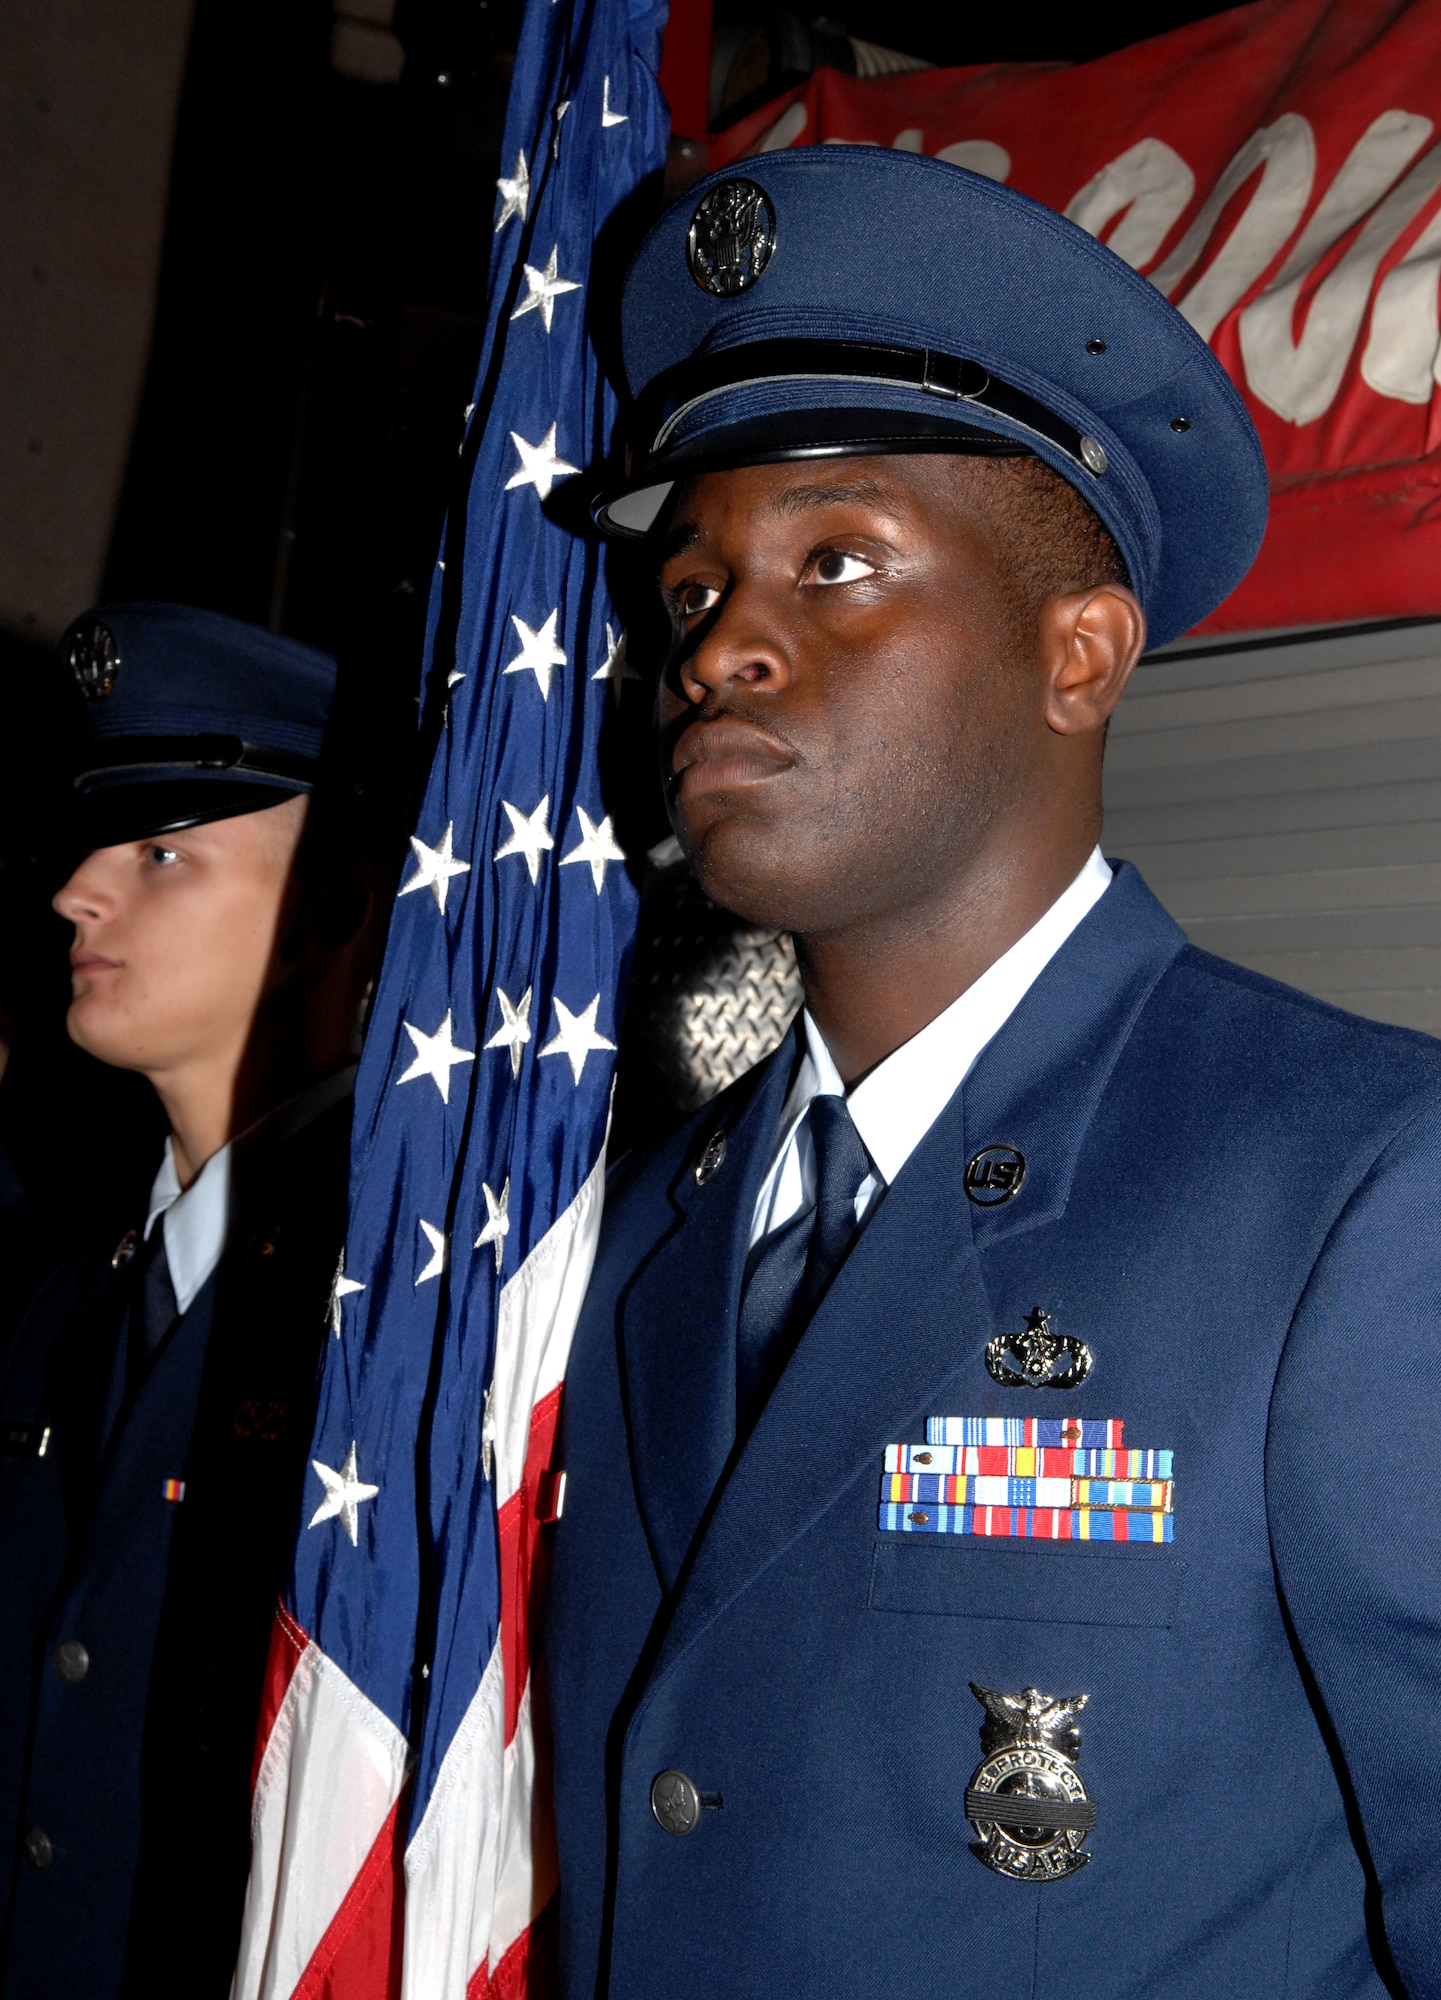 Staff Sgt. Phillip Burns, 49th Civil Engineer Squadron and member of the Steel Talon Honor Guard at Holloman Air Force Base, N.M., awaits his cue to Post the Colors at the seventh annual 9/11 Memorial Ceremony at the New Mexico Museum of Space History, September 11.  After the posting of the colors, National Anthem and invocation, Chief Wayne Mello Sr. spoke about terrorism, followed by a candle-lighting ceremony. (U.S. Air Force photo/Airman Sondra M. Escutia)